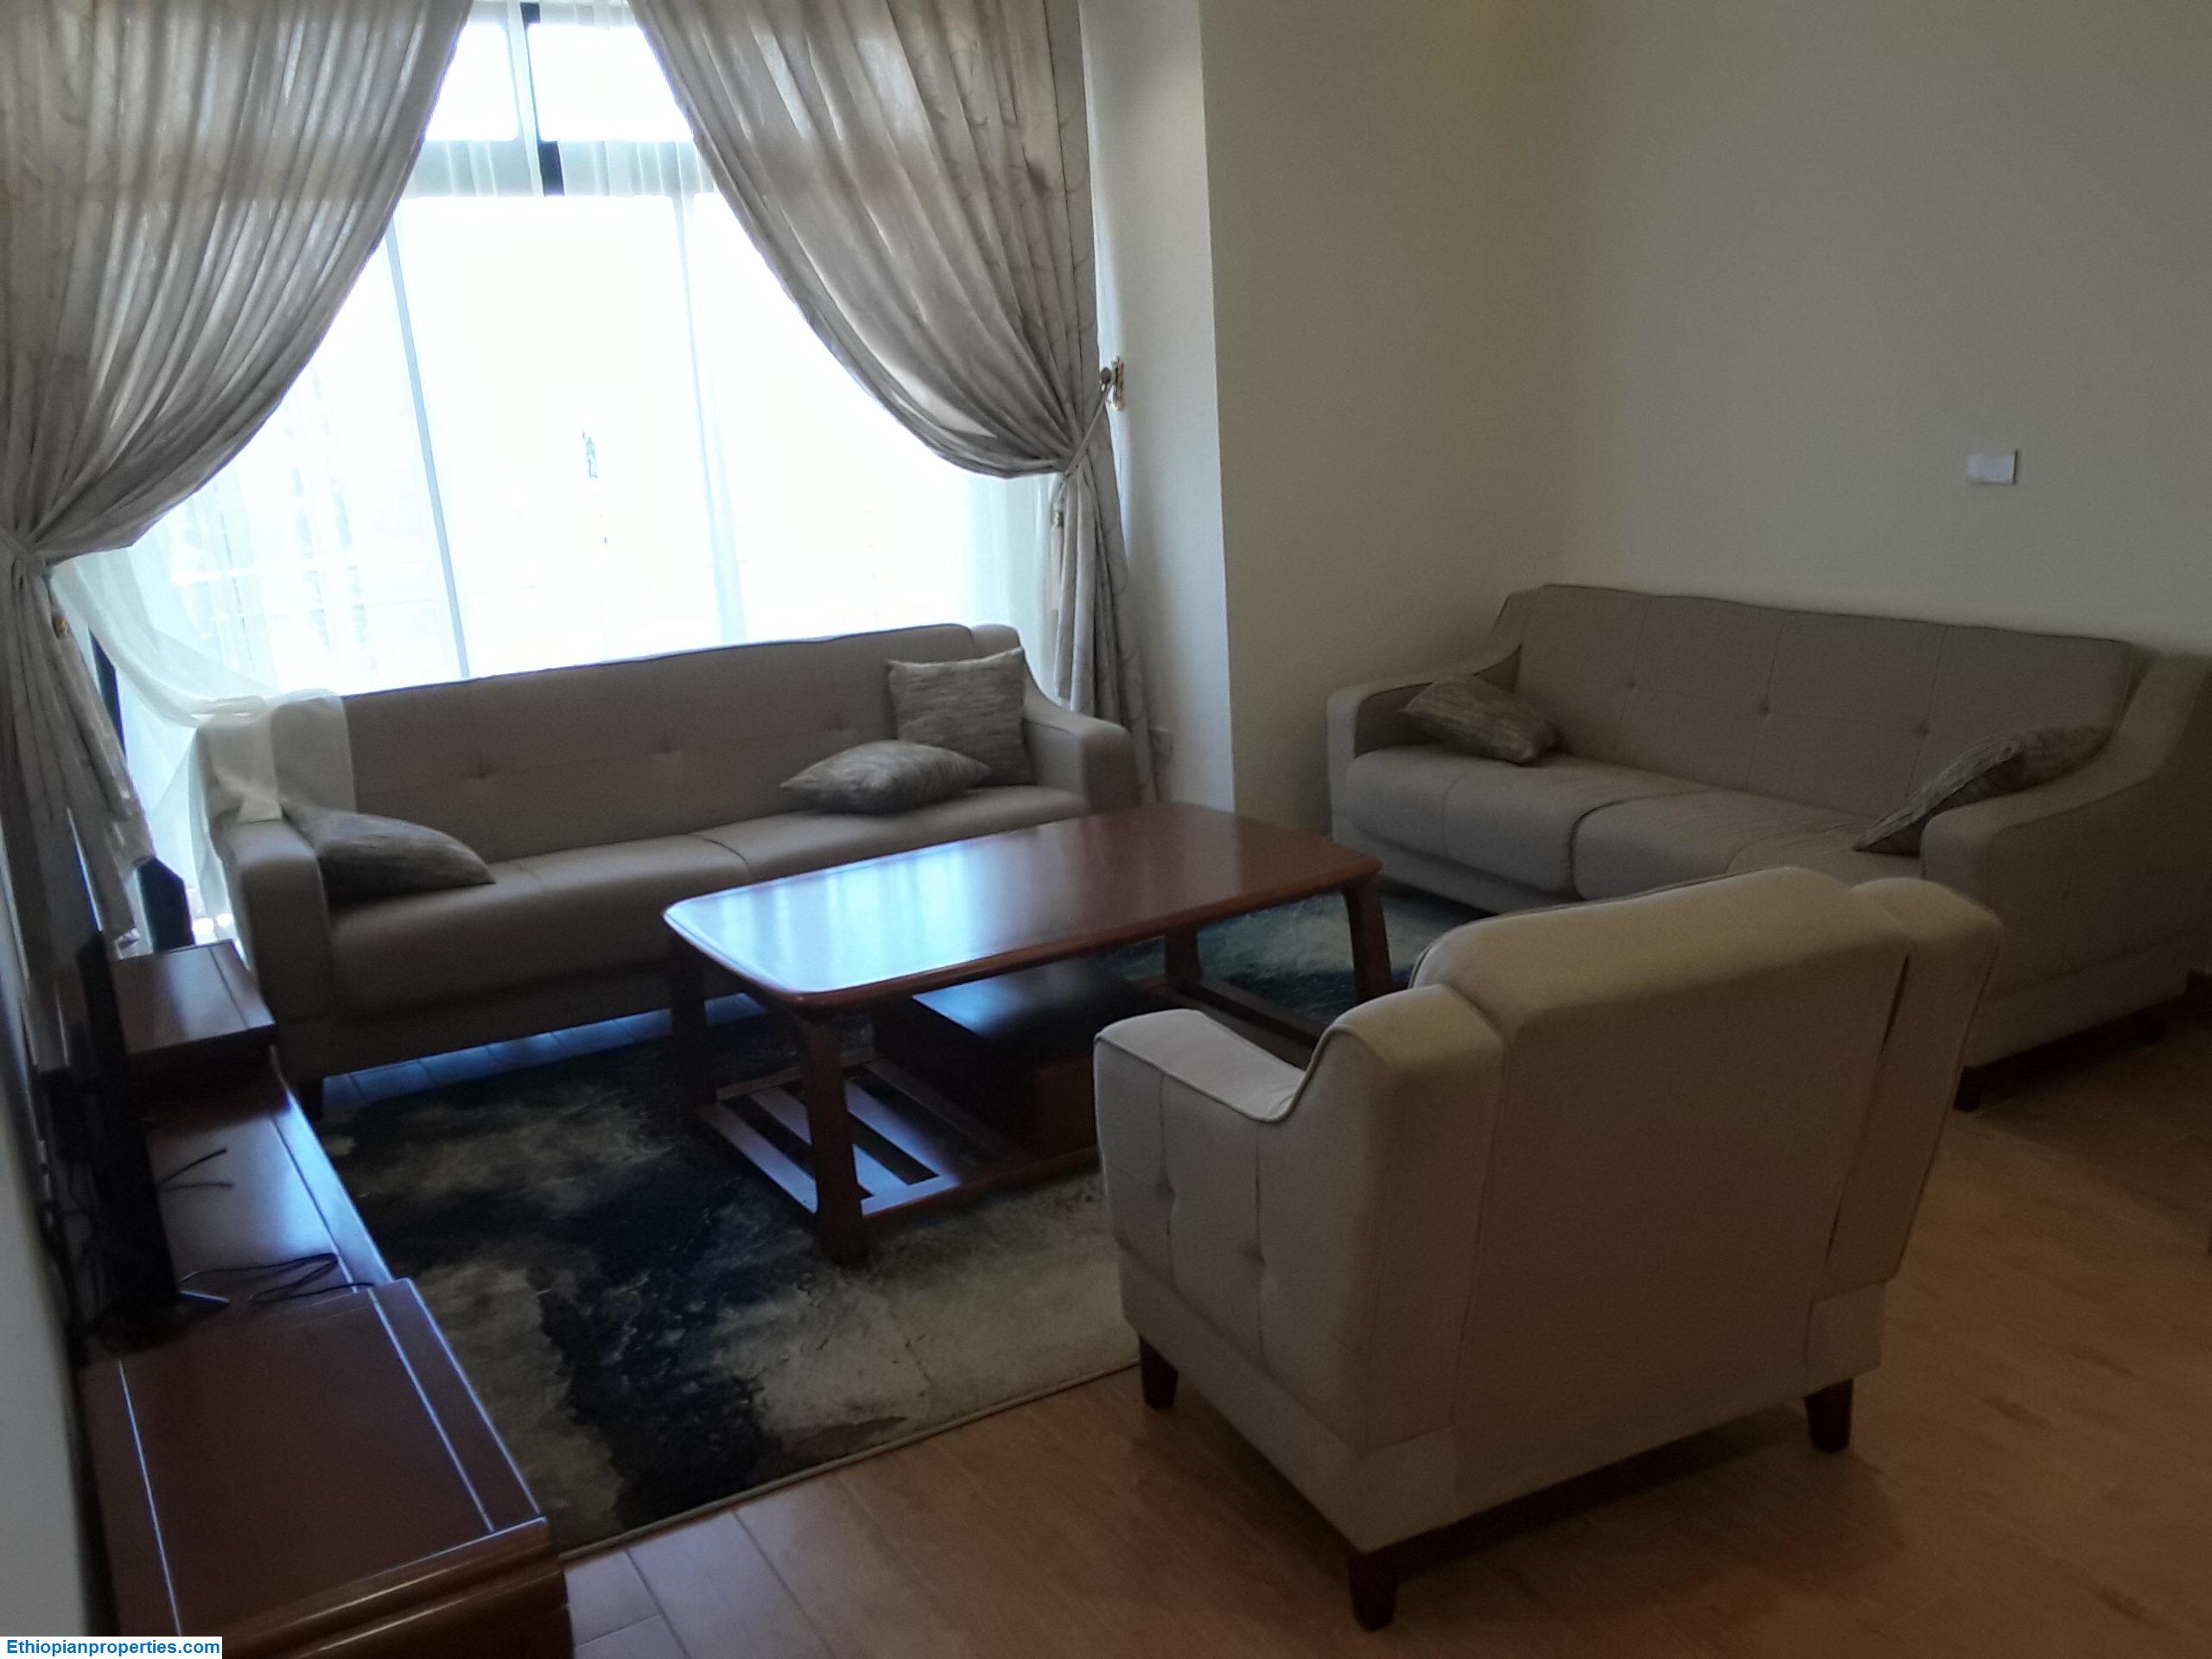 Fully Furnished 3 Bedroom Apartment for Rent - Ethiopianproperties.com